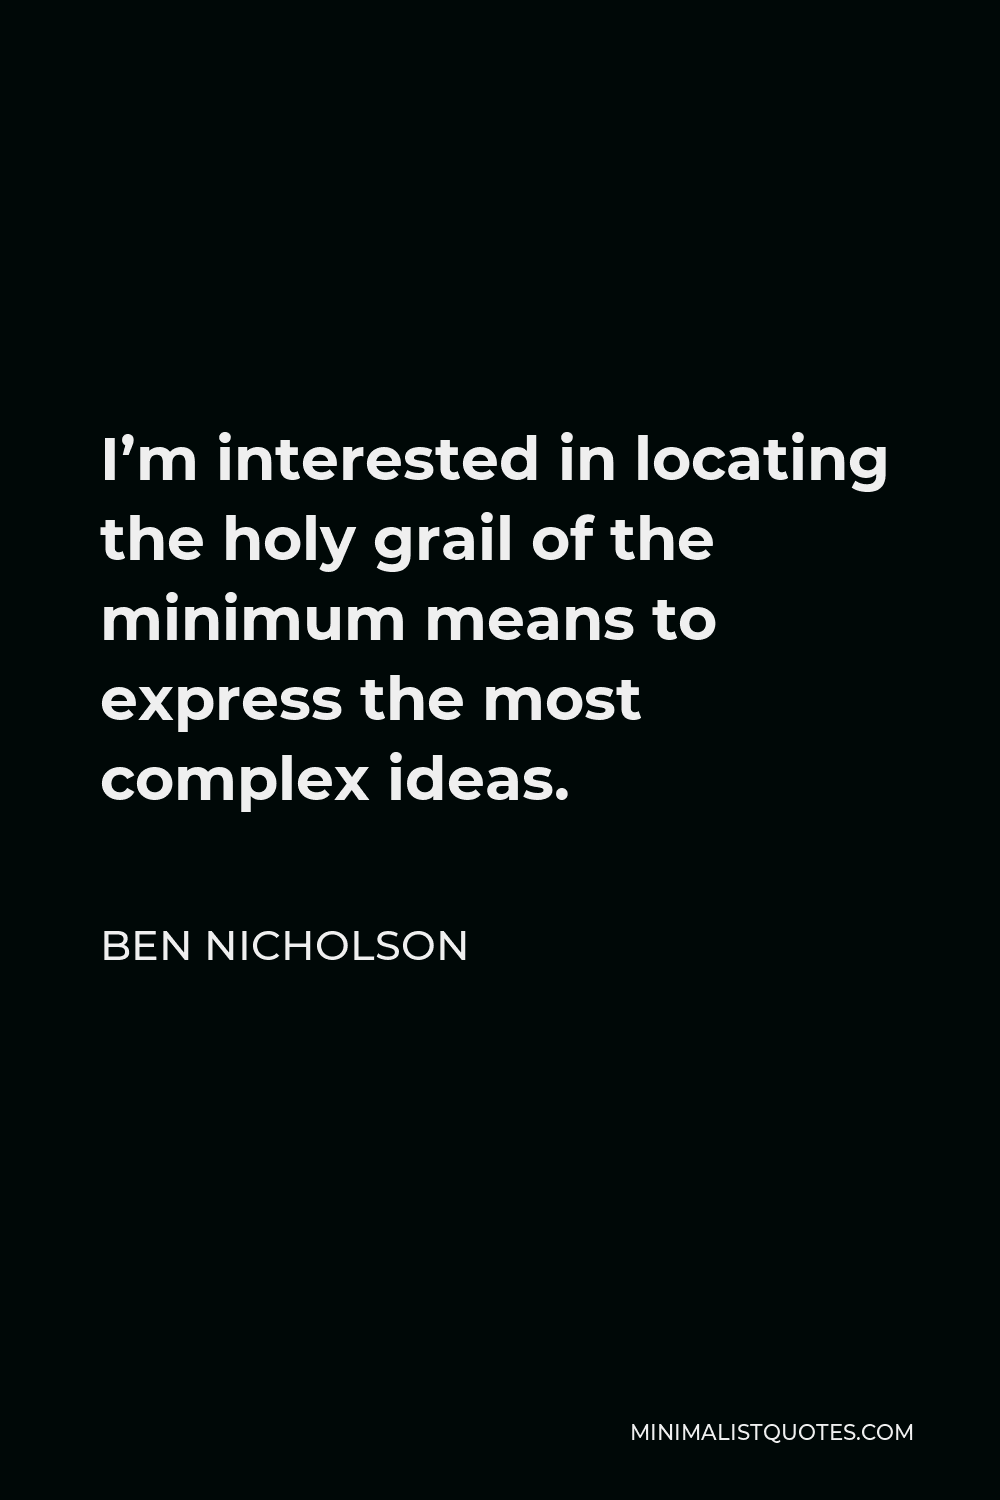 Ben Nicholson Quote - I’m interested in locating the holy grail of the minimum means to express the most complex ideas.